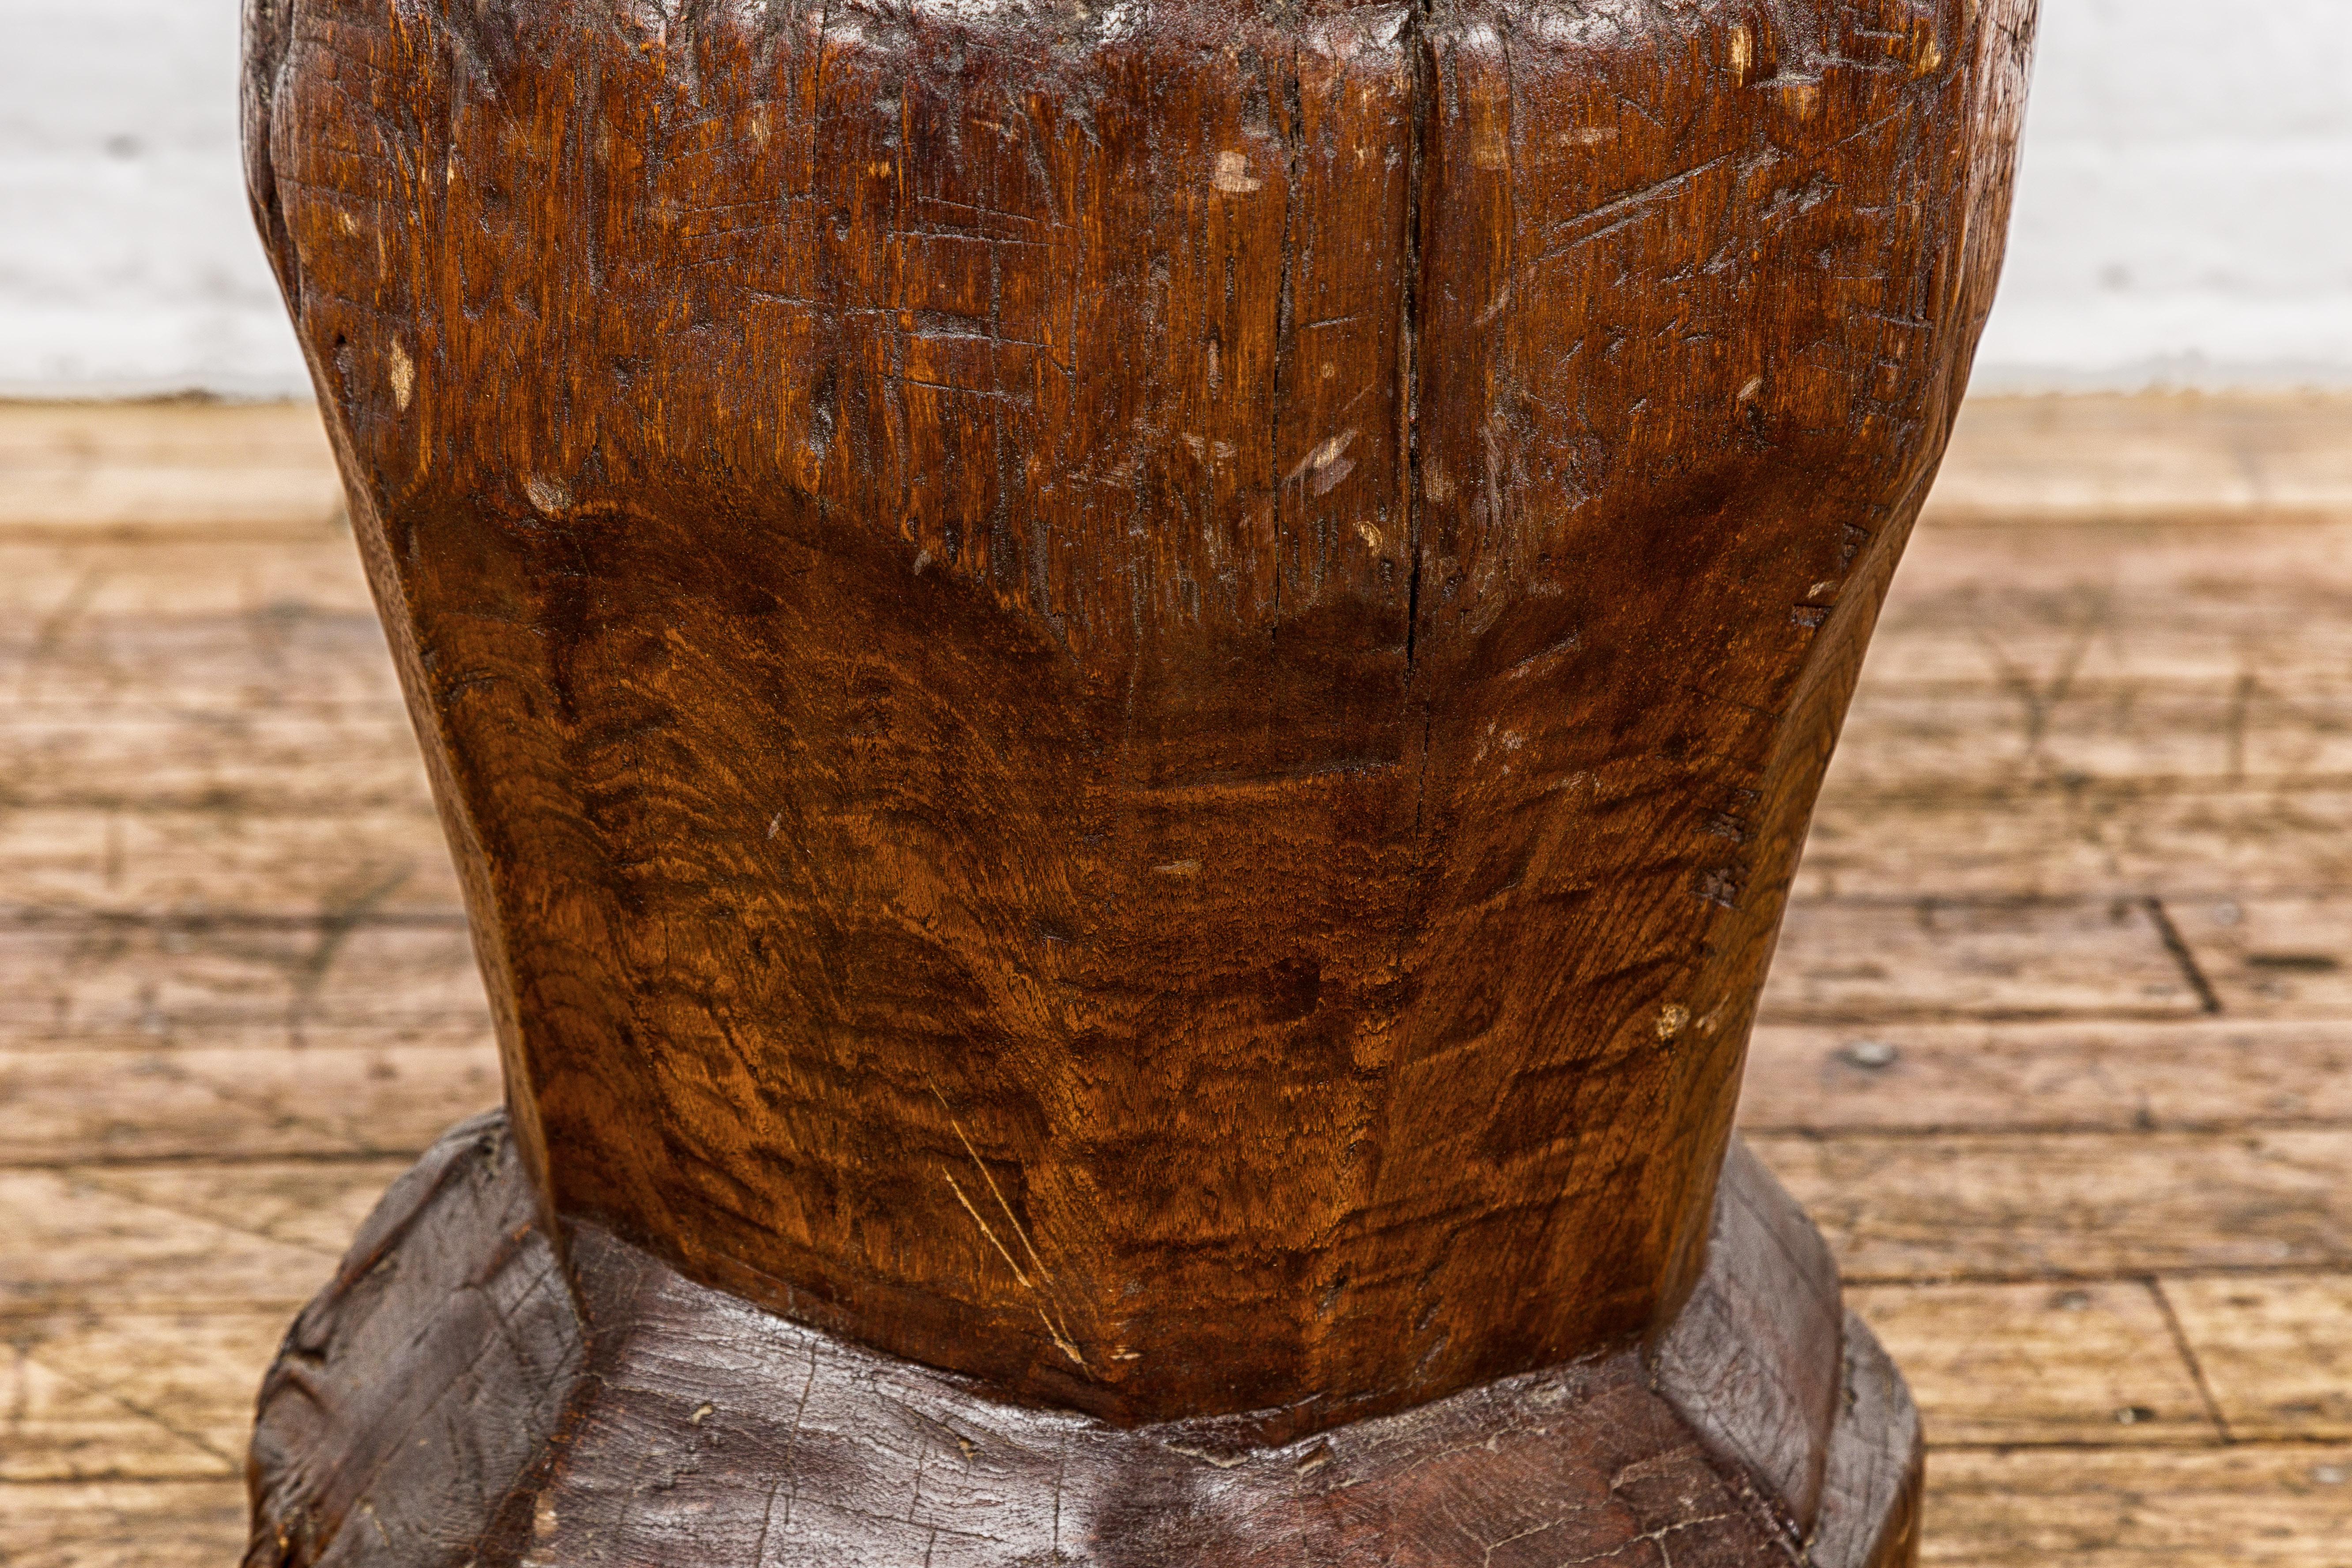 19th Century Rustic Teak Wood Mortar Urn, Antique Planter for Vintage Home Decor In Good Condition For Sale In Yonkers, NY